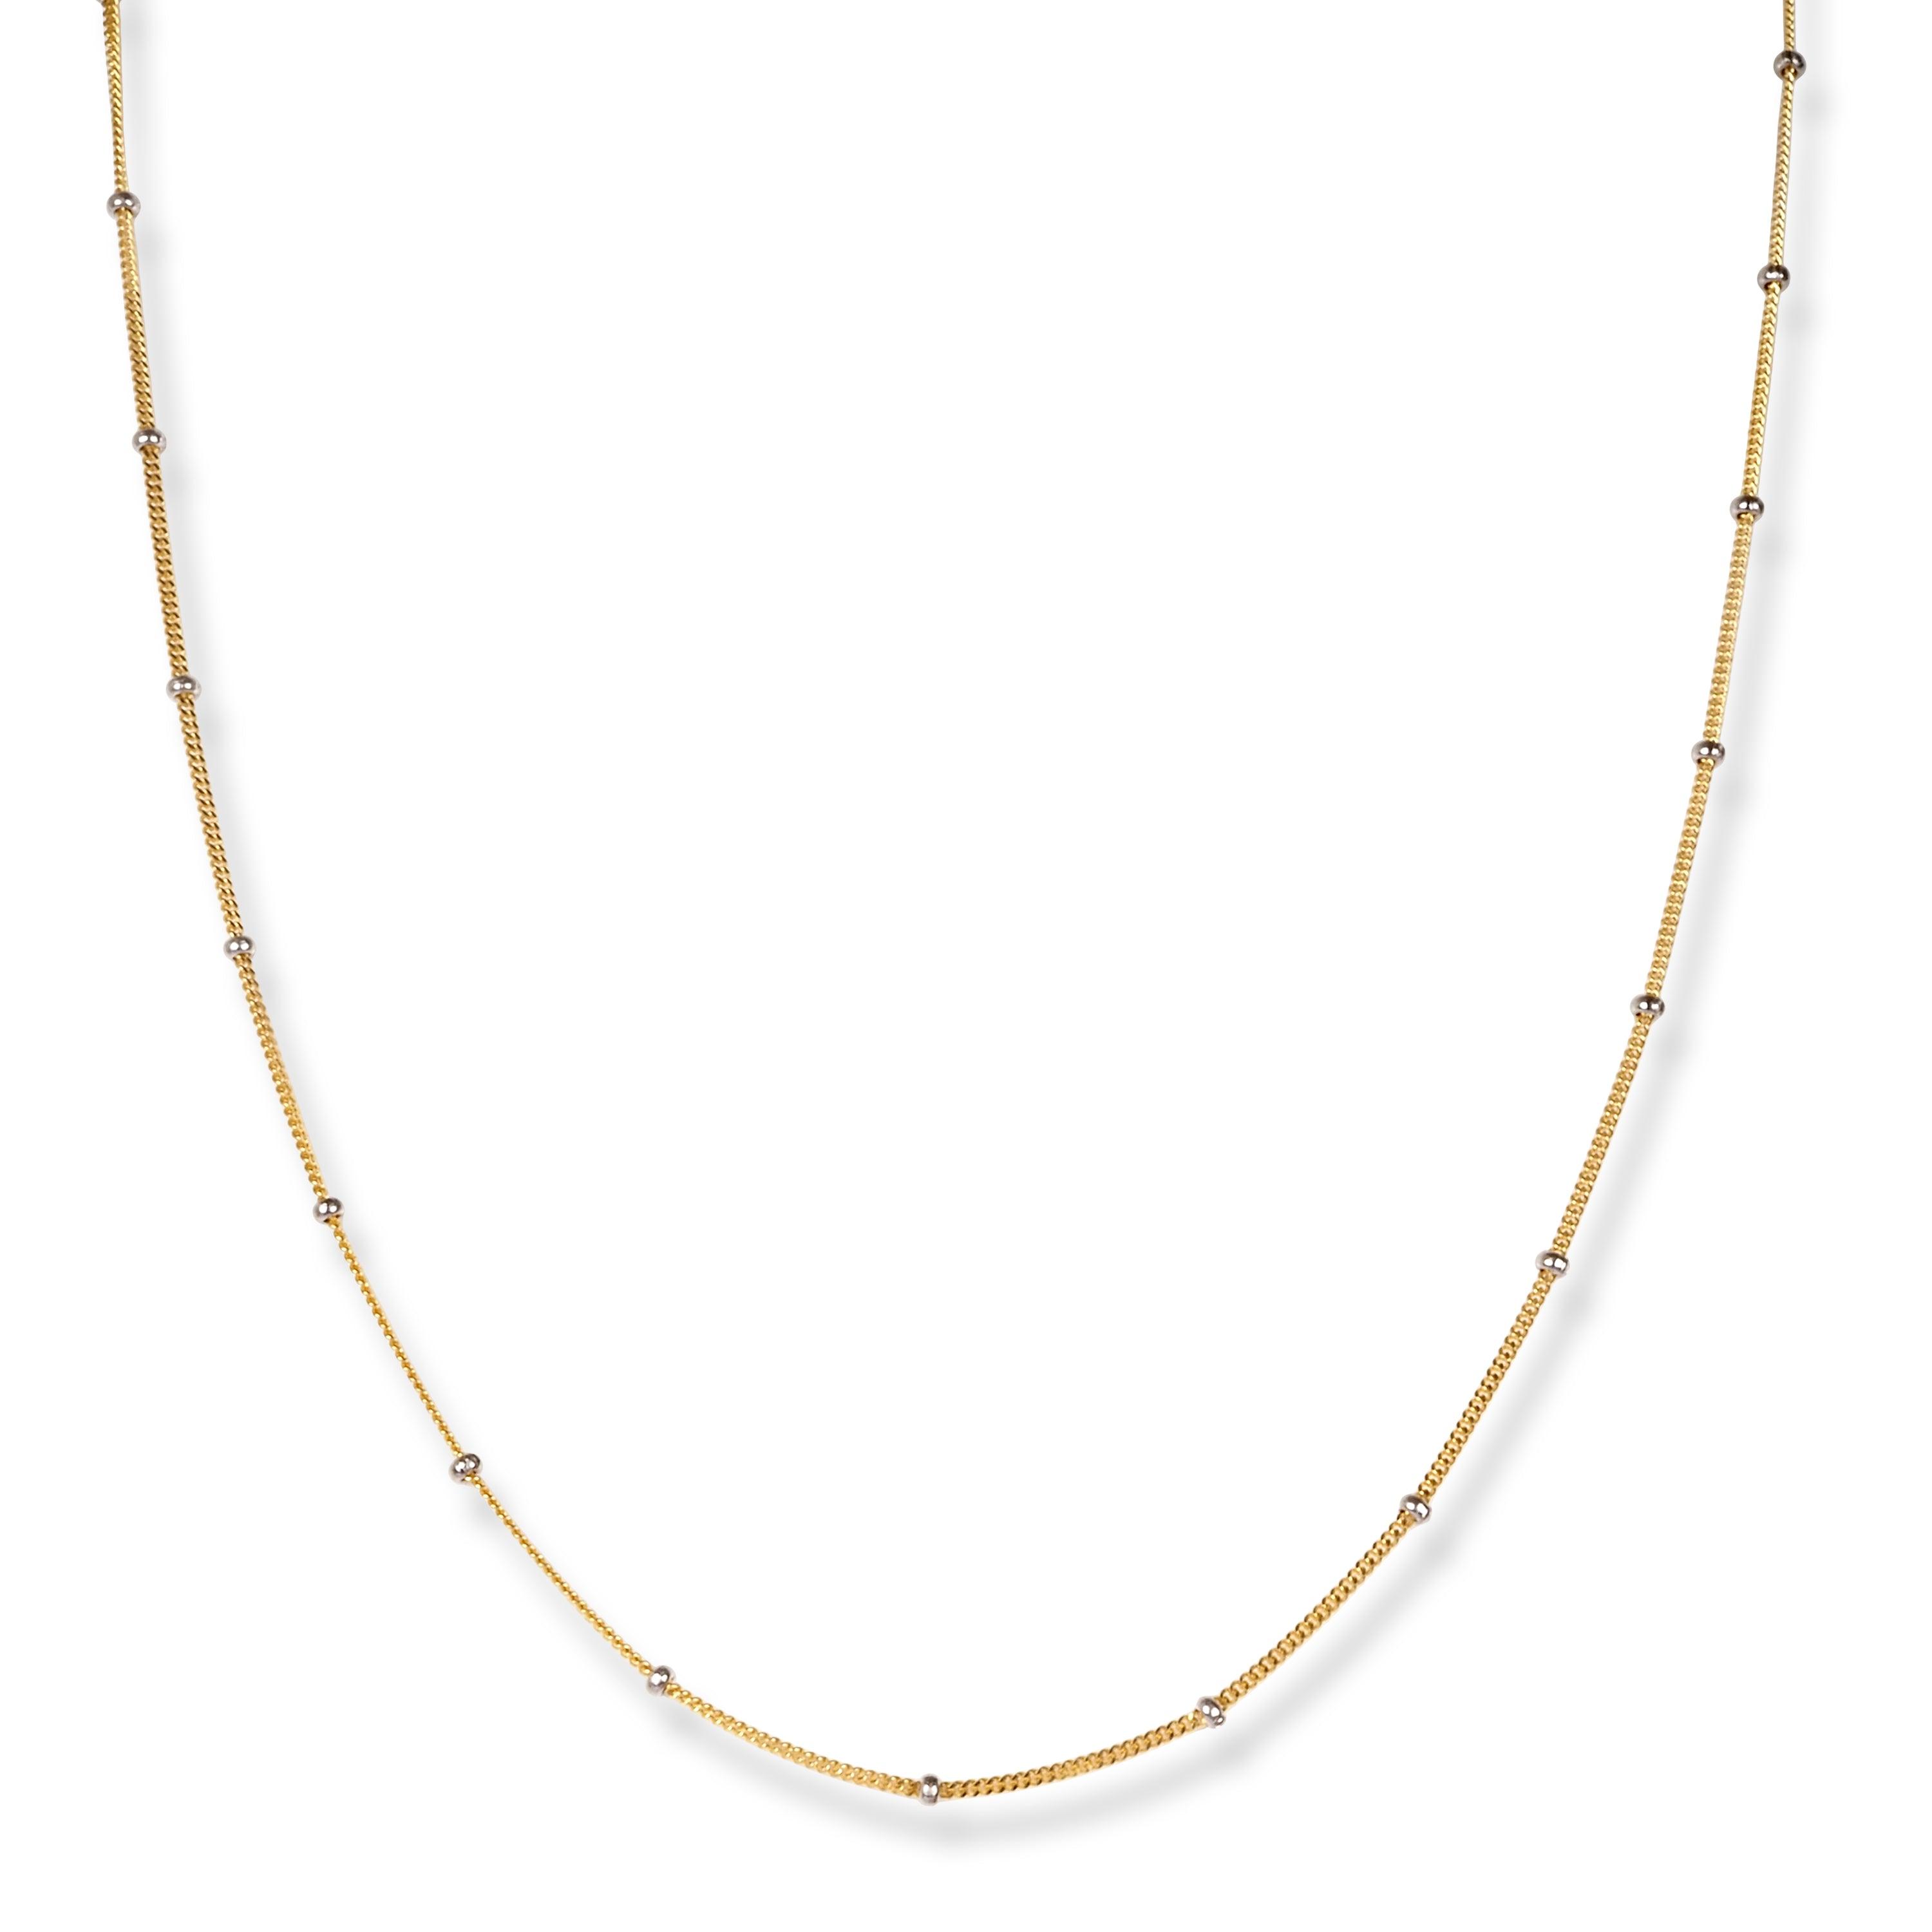 18ct Yellow Gold Chain with Rhodium Plated Beads and Lobster Clasp C-3800 - Minar Jewellers